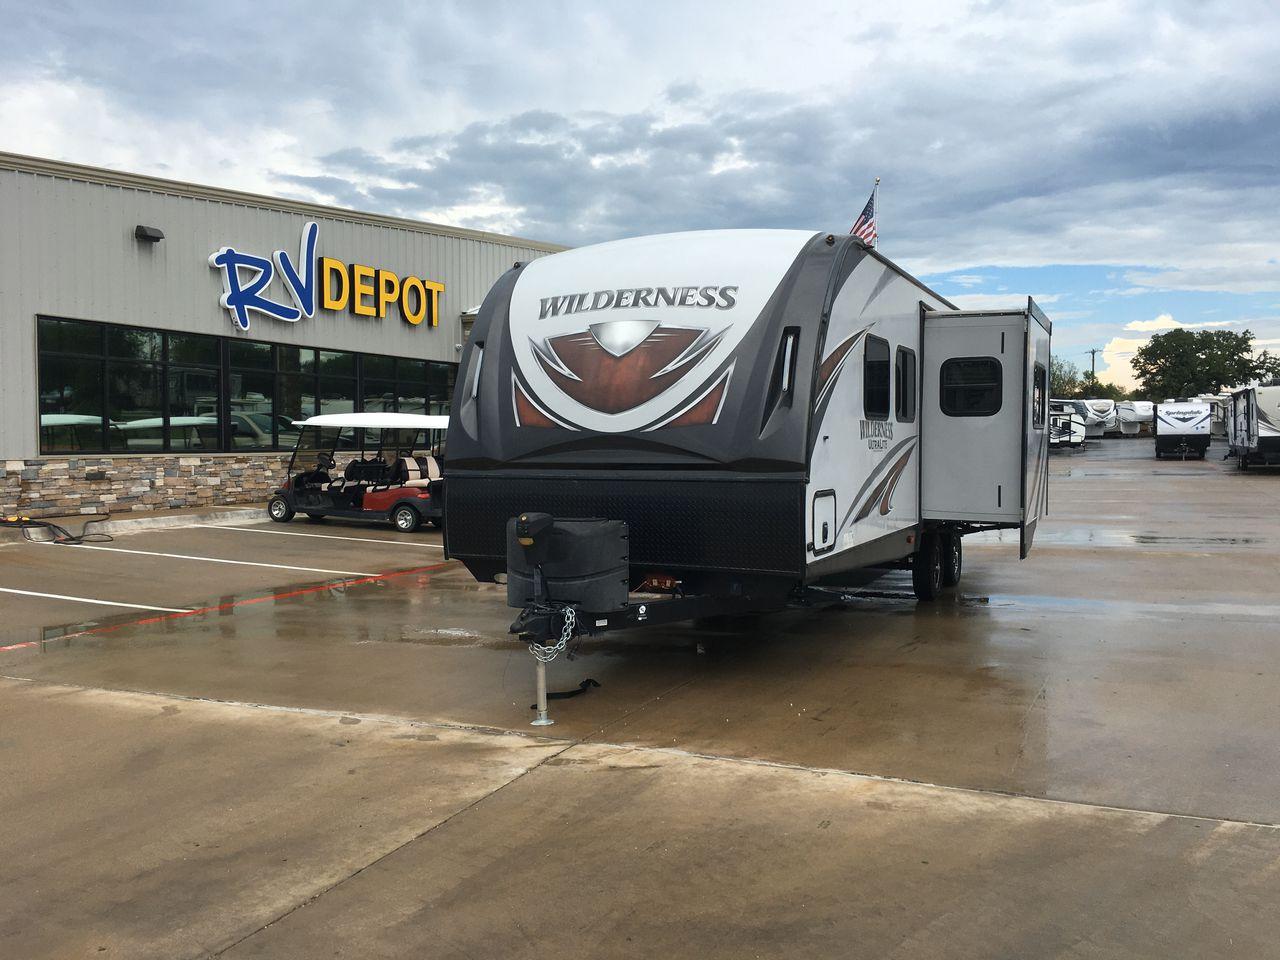 2018 HEARTLAND WILDERNESS 2450FB (5SFNB3022JN) , Length: 30.33 ft. | Dry Weight: 5,433 lbs. | Gross Weight: 6,900 lbs. | Slides: 1 transmission, located at 4319 N Main St, Cleburne, TX, 76033, (817) 678-5133, 32.385960, -97.391212 - With the 2018 Heartland Recreation Wilderness 2450FB travel trailer, set out on an outdoor adventure. For those looking for an unforgettable camping experience, this well-designed RV offers the ideal home away from home thanks to its innovative design, comfort, and functionality. The dimensions of t - Photo #0